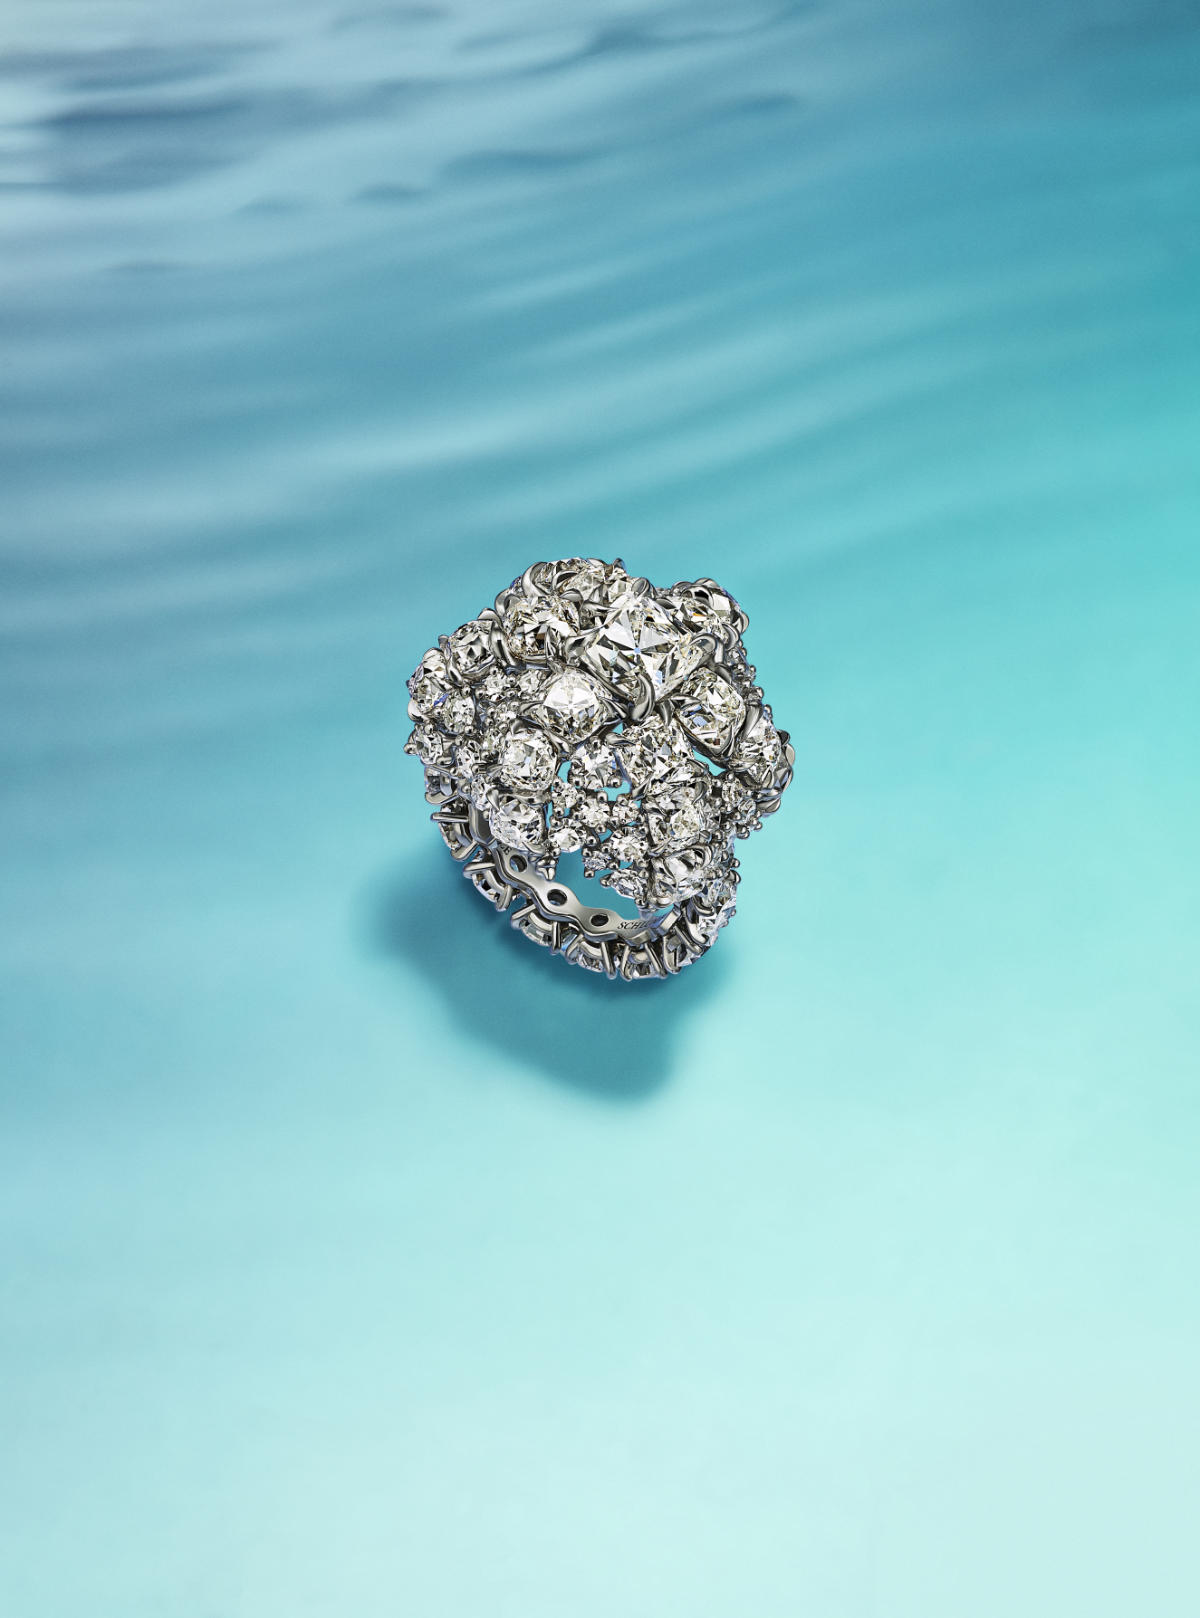 Tiffany & Co. Introduces The Fall Expression Of Blue Book 2023: Out Of The Blue